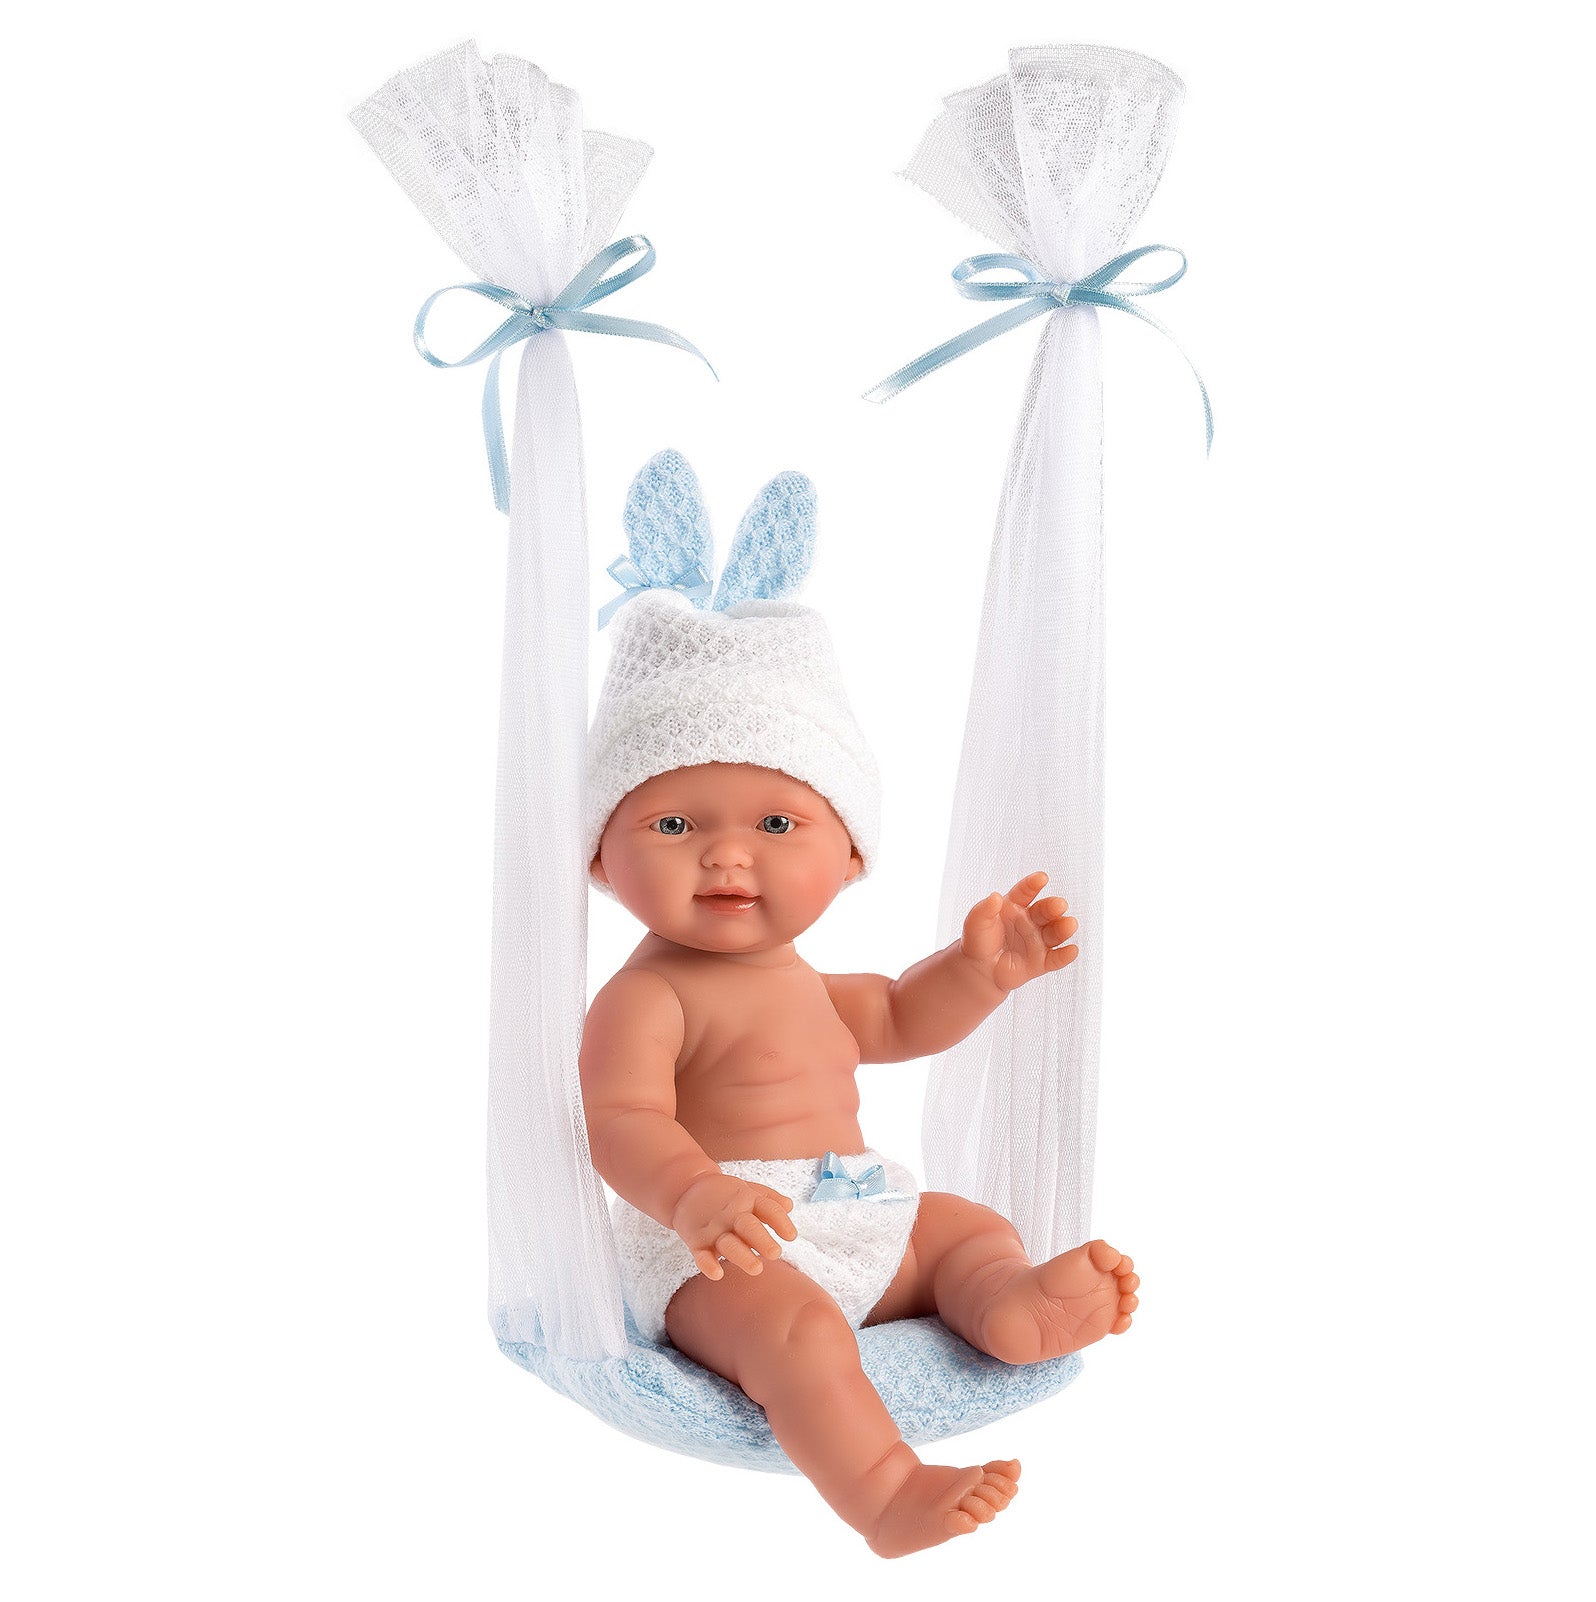 Llorens 10.2" Anatomically-Correct Baby Doll Sam with Tulle Baby Swing Dolls